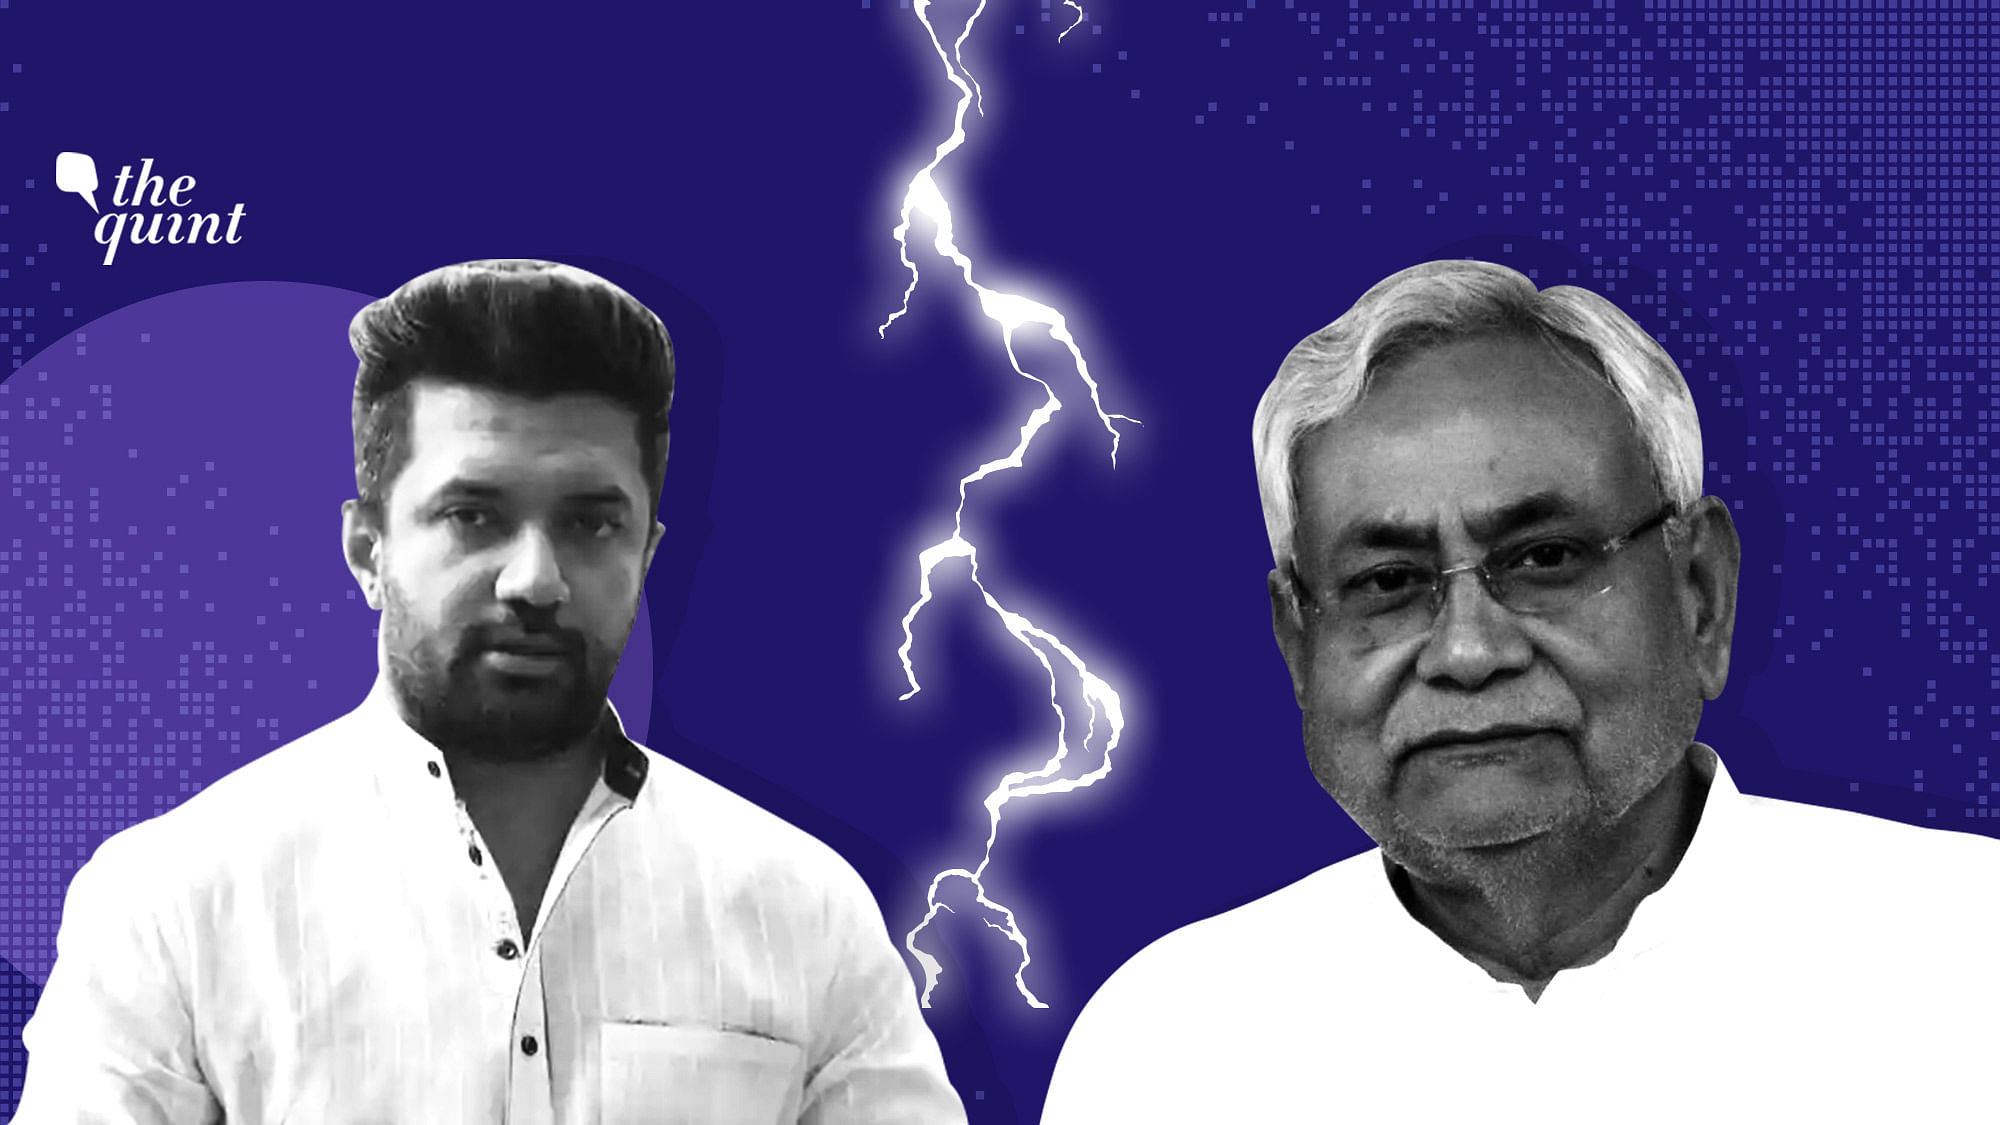 Lok Janshakti Party (LJP) leader Chirag Paswan took to Twitter on Monday, 16 November to taunt Nitish Kumar after he took oath as the chief minister of Bihar.